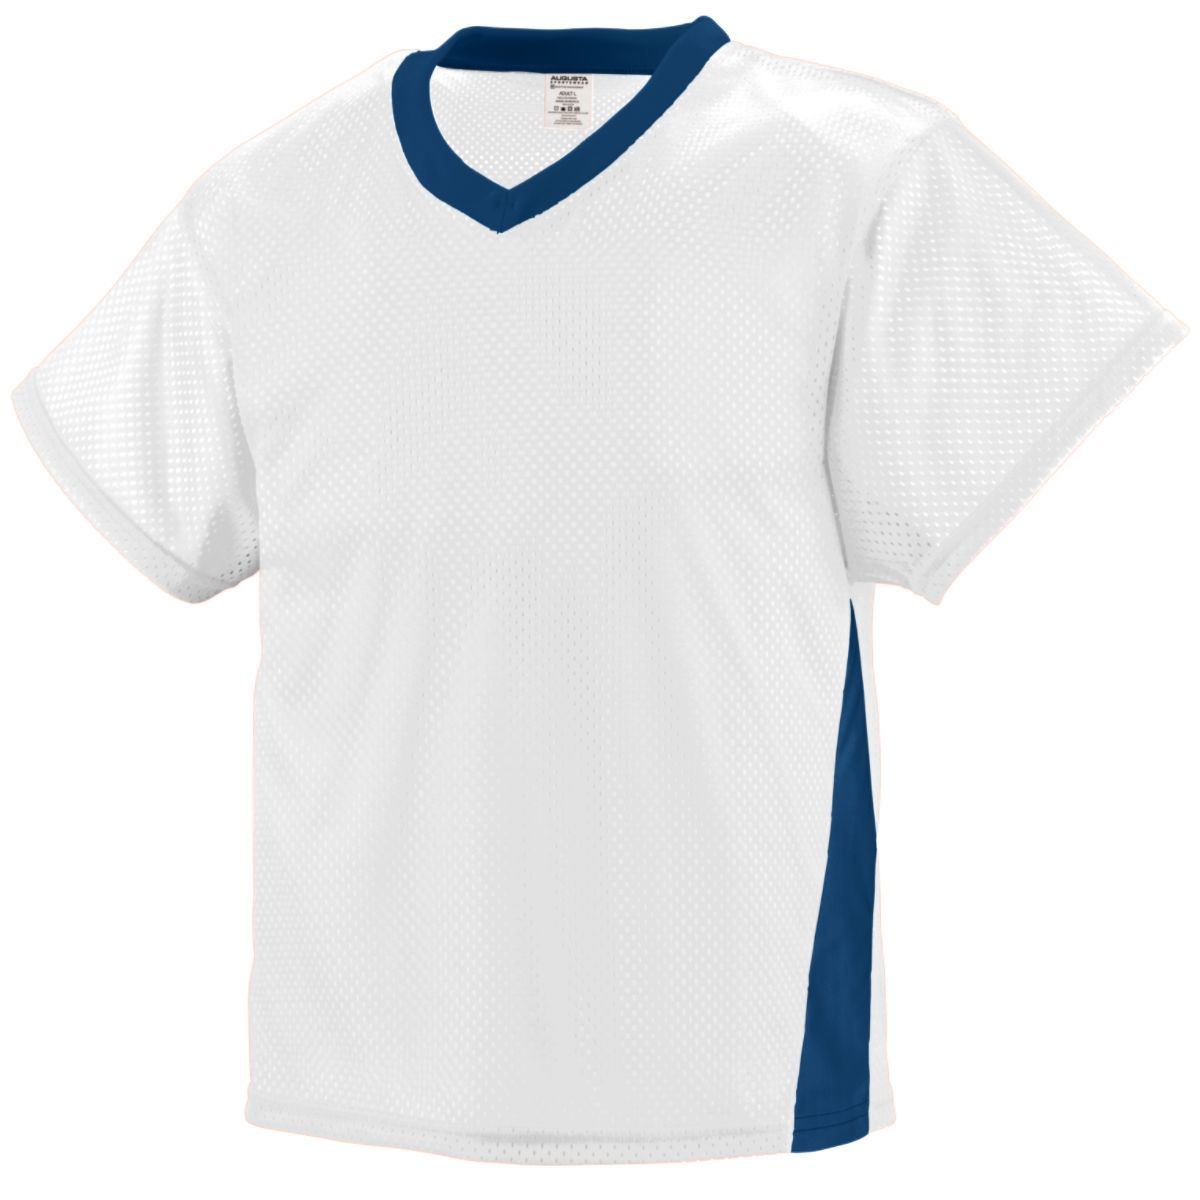 Augusta Sportswear High Score Jersey in White/Navy  -Part of the Adult, Adult-Jersey, Augusta-Products, Lacrosse, Shirts, All-Sports, All-Sports-1 product lines at KanaleyCreations.com